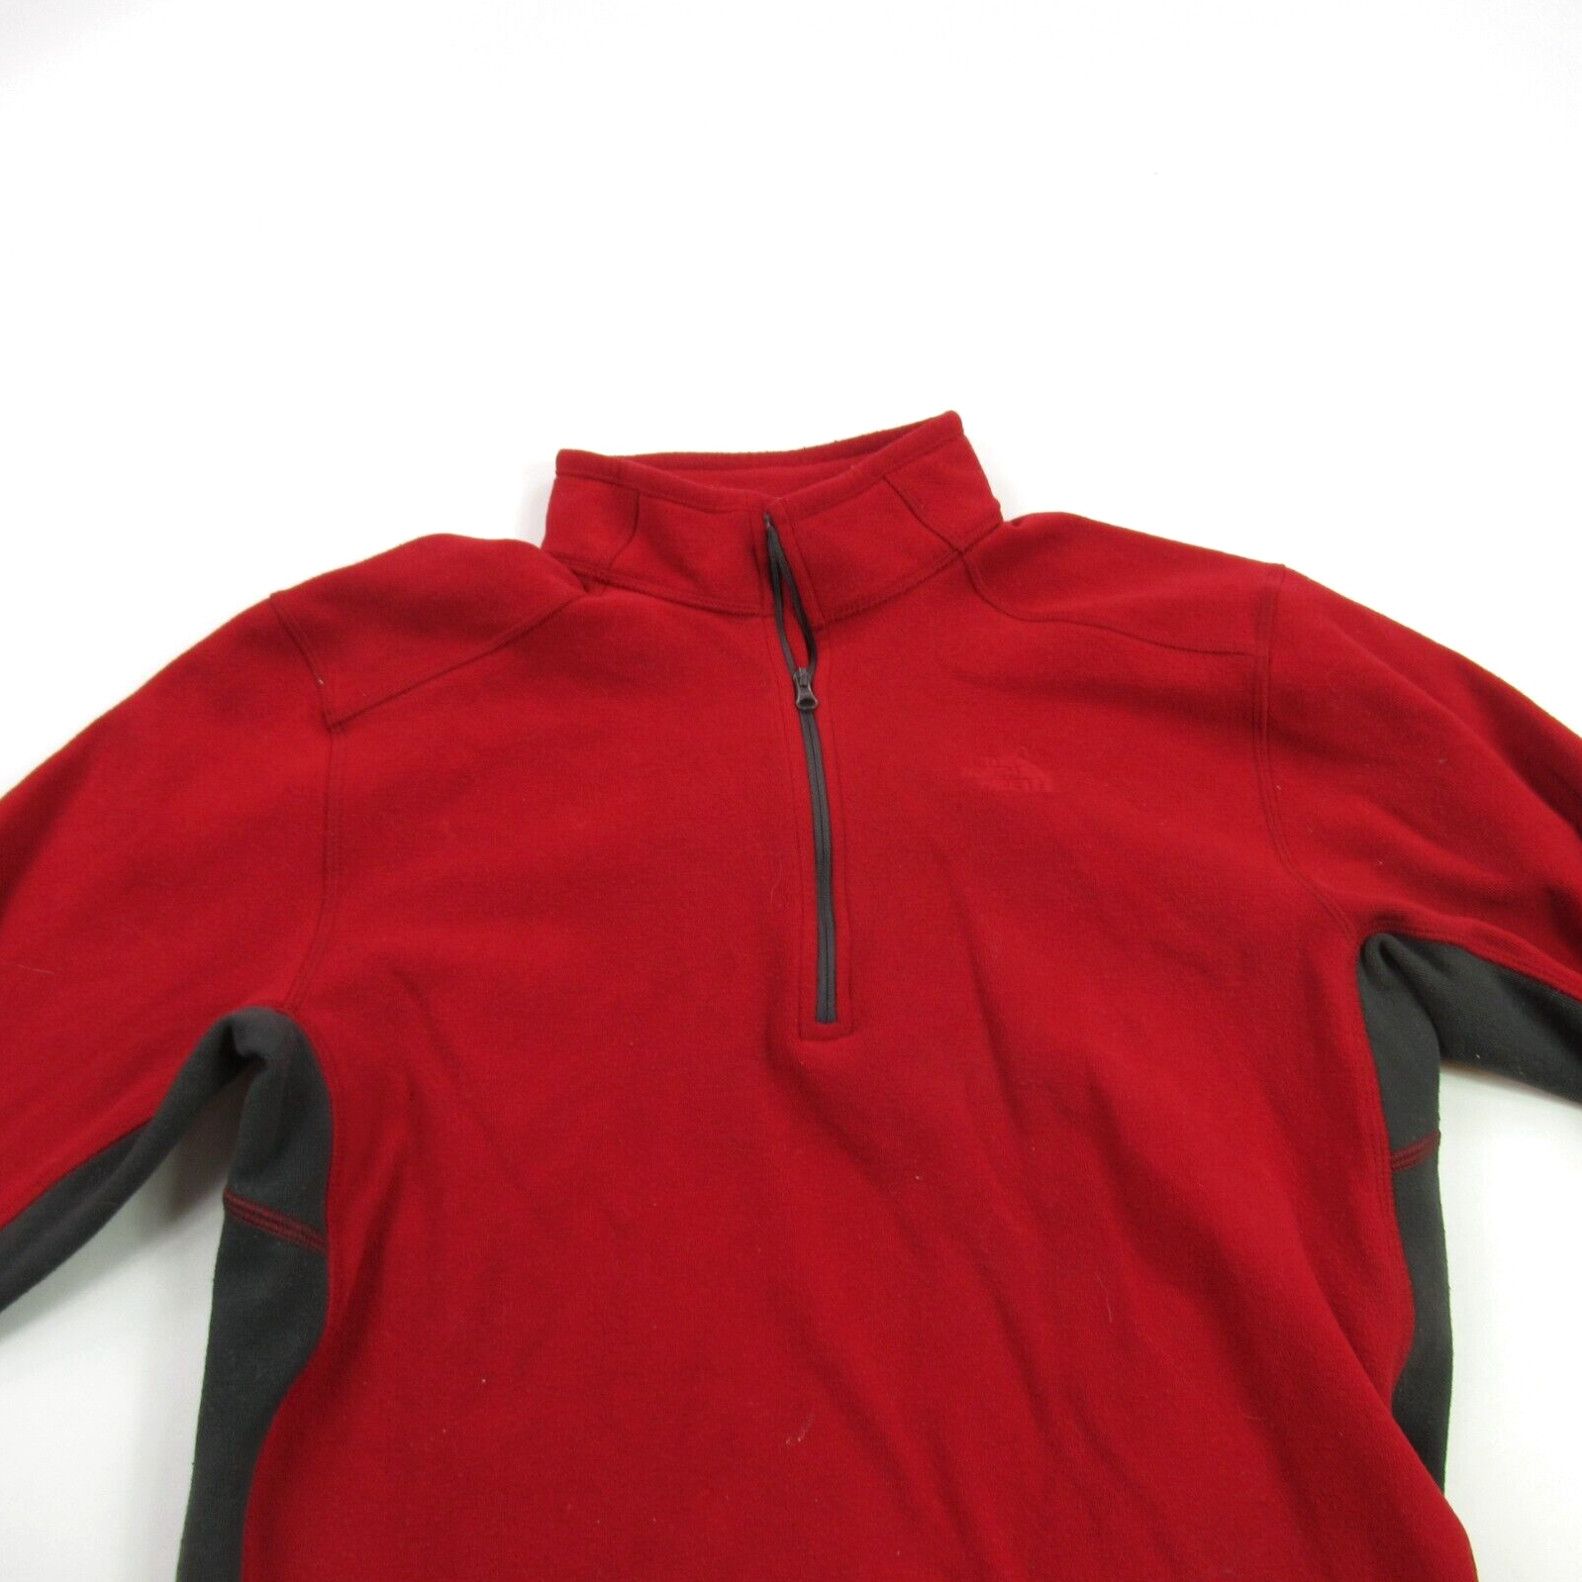 The North Face North Face Sweater Mens Large Long Sleeve 1/4 Zip Pullover Red Fleece Casual Size US L / EU 52-54 / 3 - 2 Preview